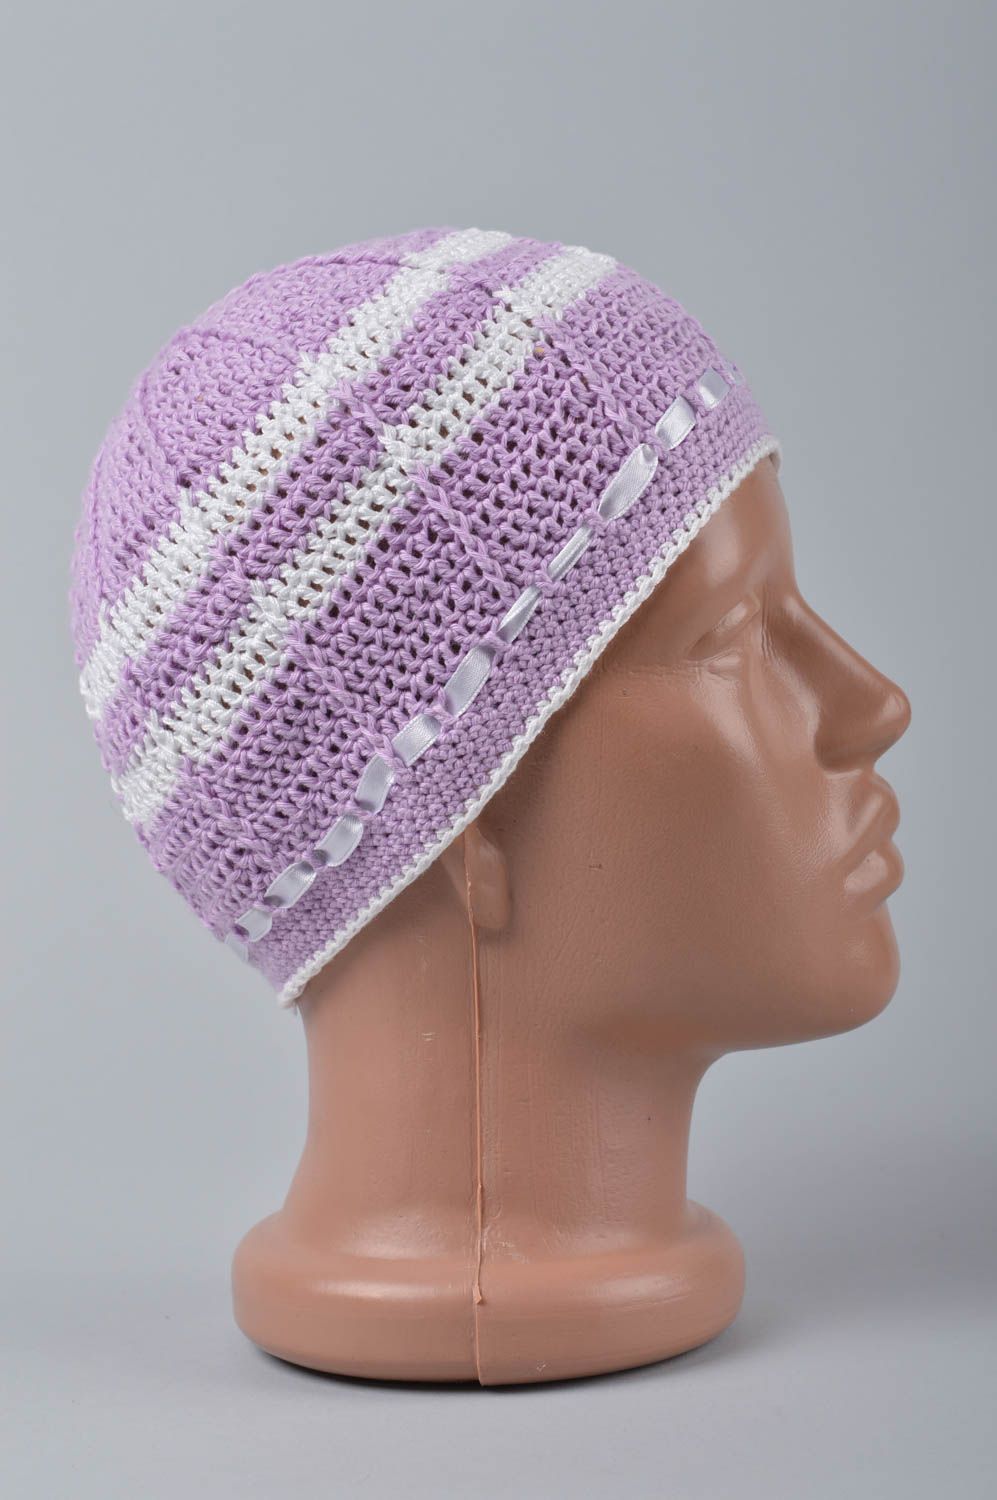 Unusual handmade crochet hat cute hats fashion accessories gifts for kids photo 3